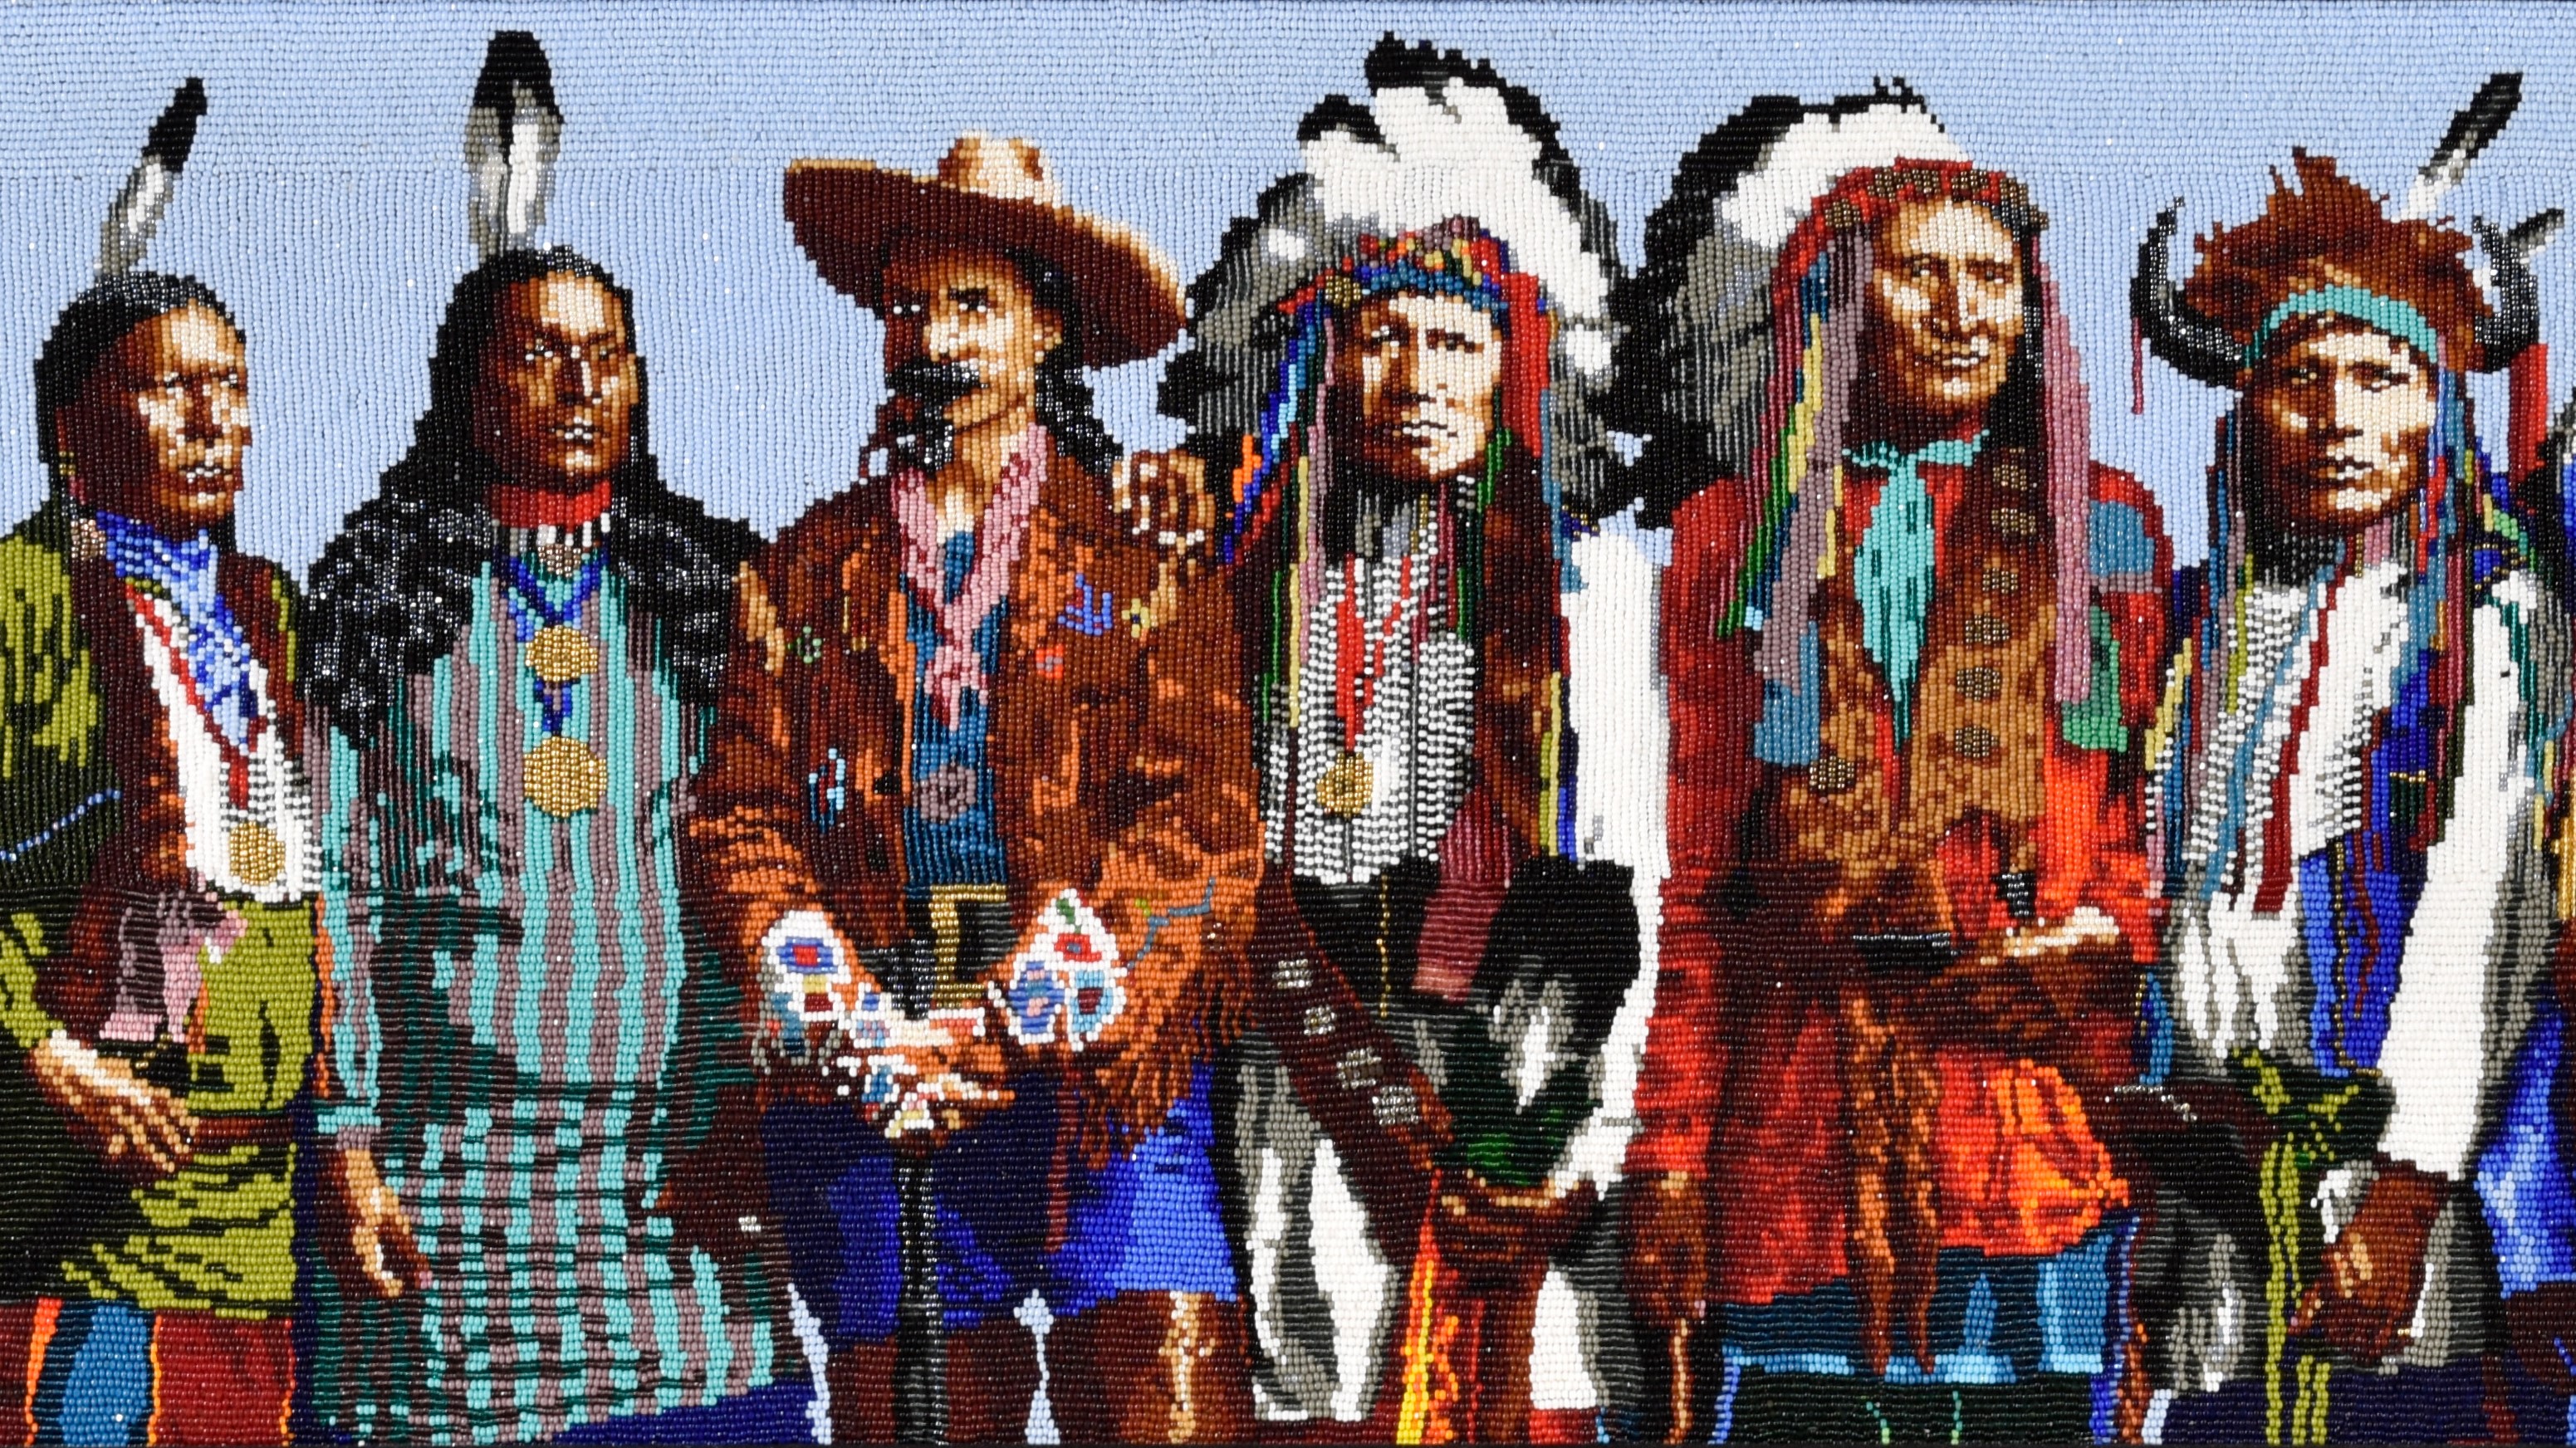 Marcus Amerman (Choctaw), Buffalo Bill Cody with Pawnee and Lakota Men, ca. 2010s, glass beads on fabric, 9 3/8 × 26 7/8 in., gift of the estate of Ruth and Sidney Schultz